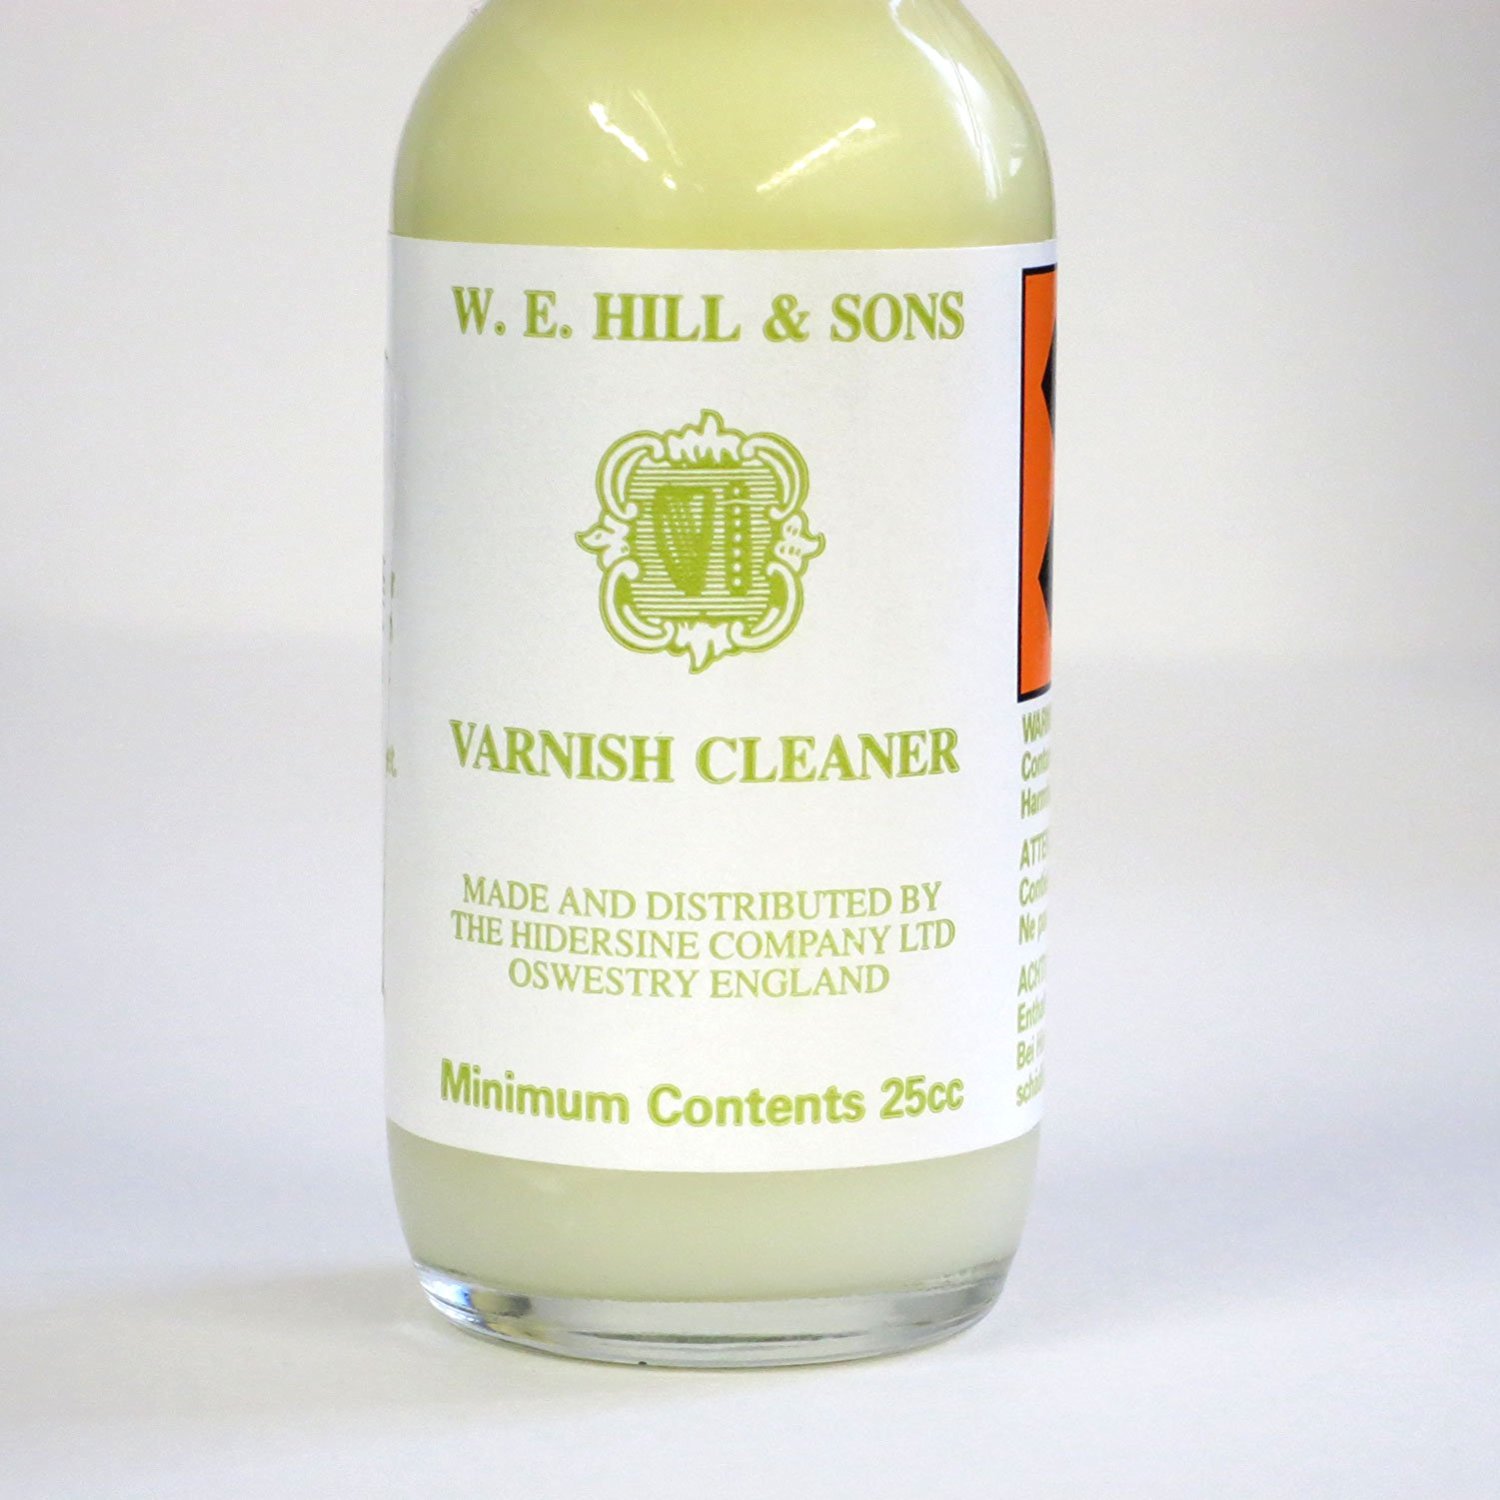 W. E. Hill & Sons Varnish Cleaner in action